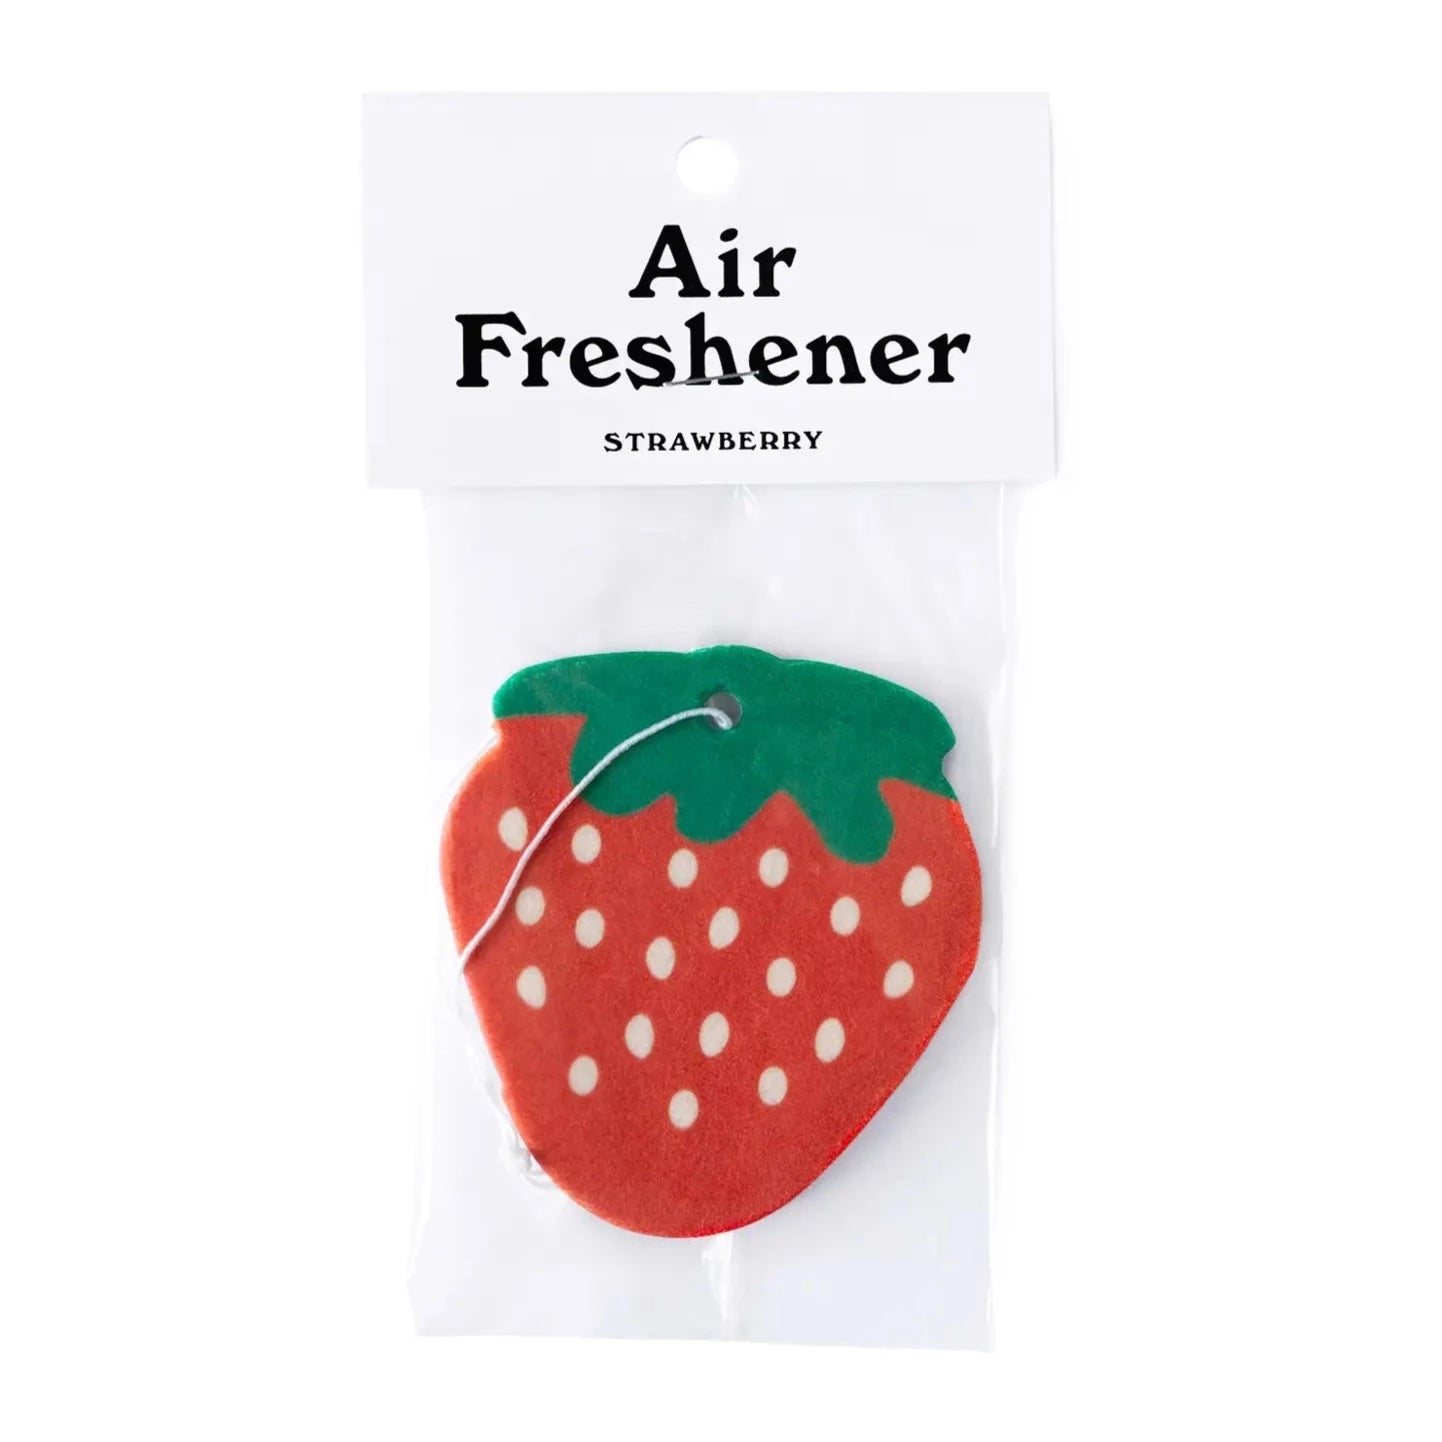 Strawberry shaped air fresher printed to look like a strawberry. It has the green leaves and white spots- overall strawberry is red. Comes in clear bag with white tag stated to the top